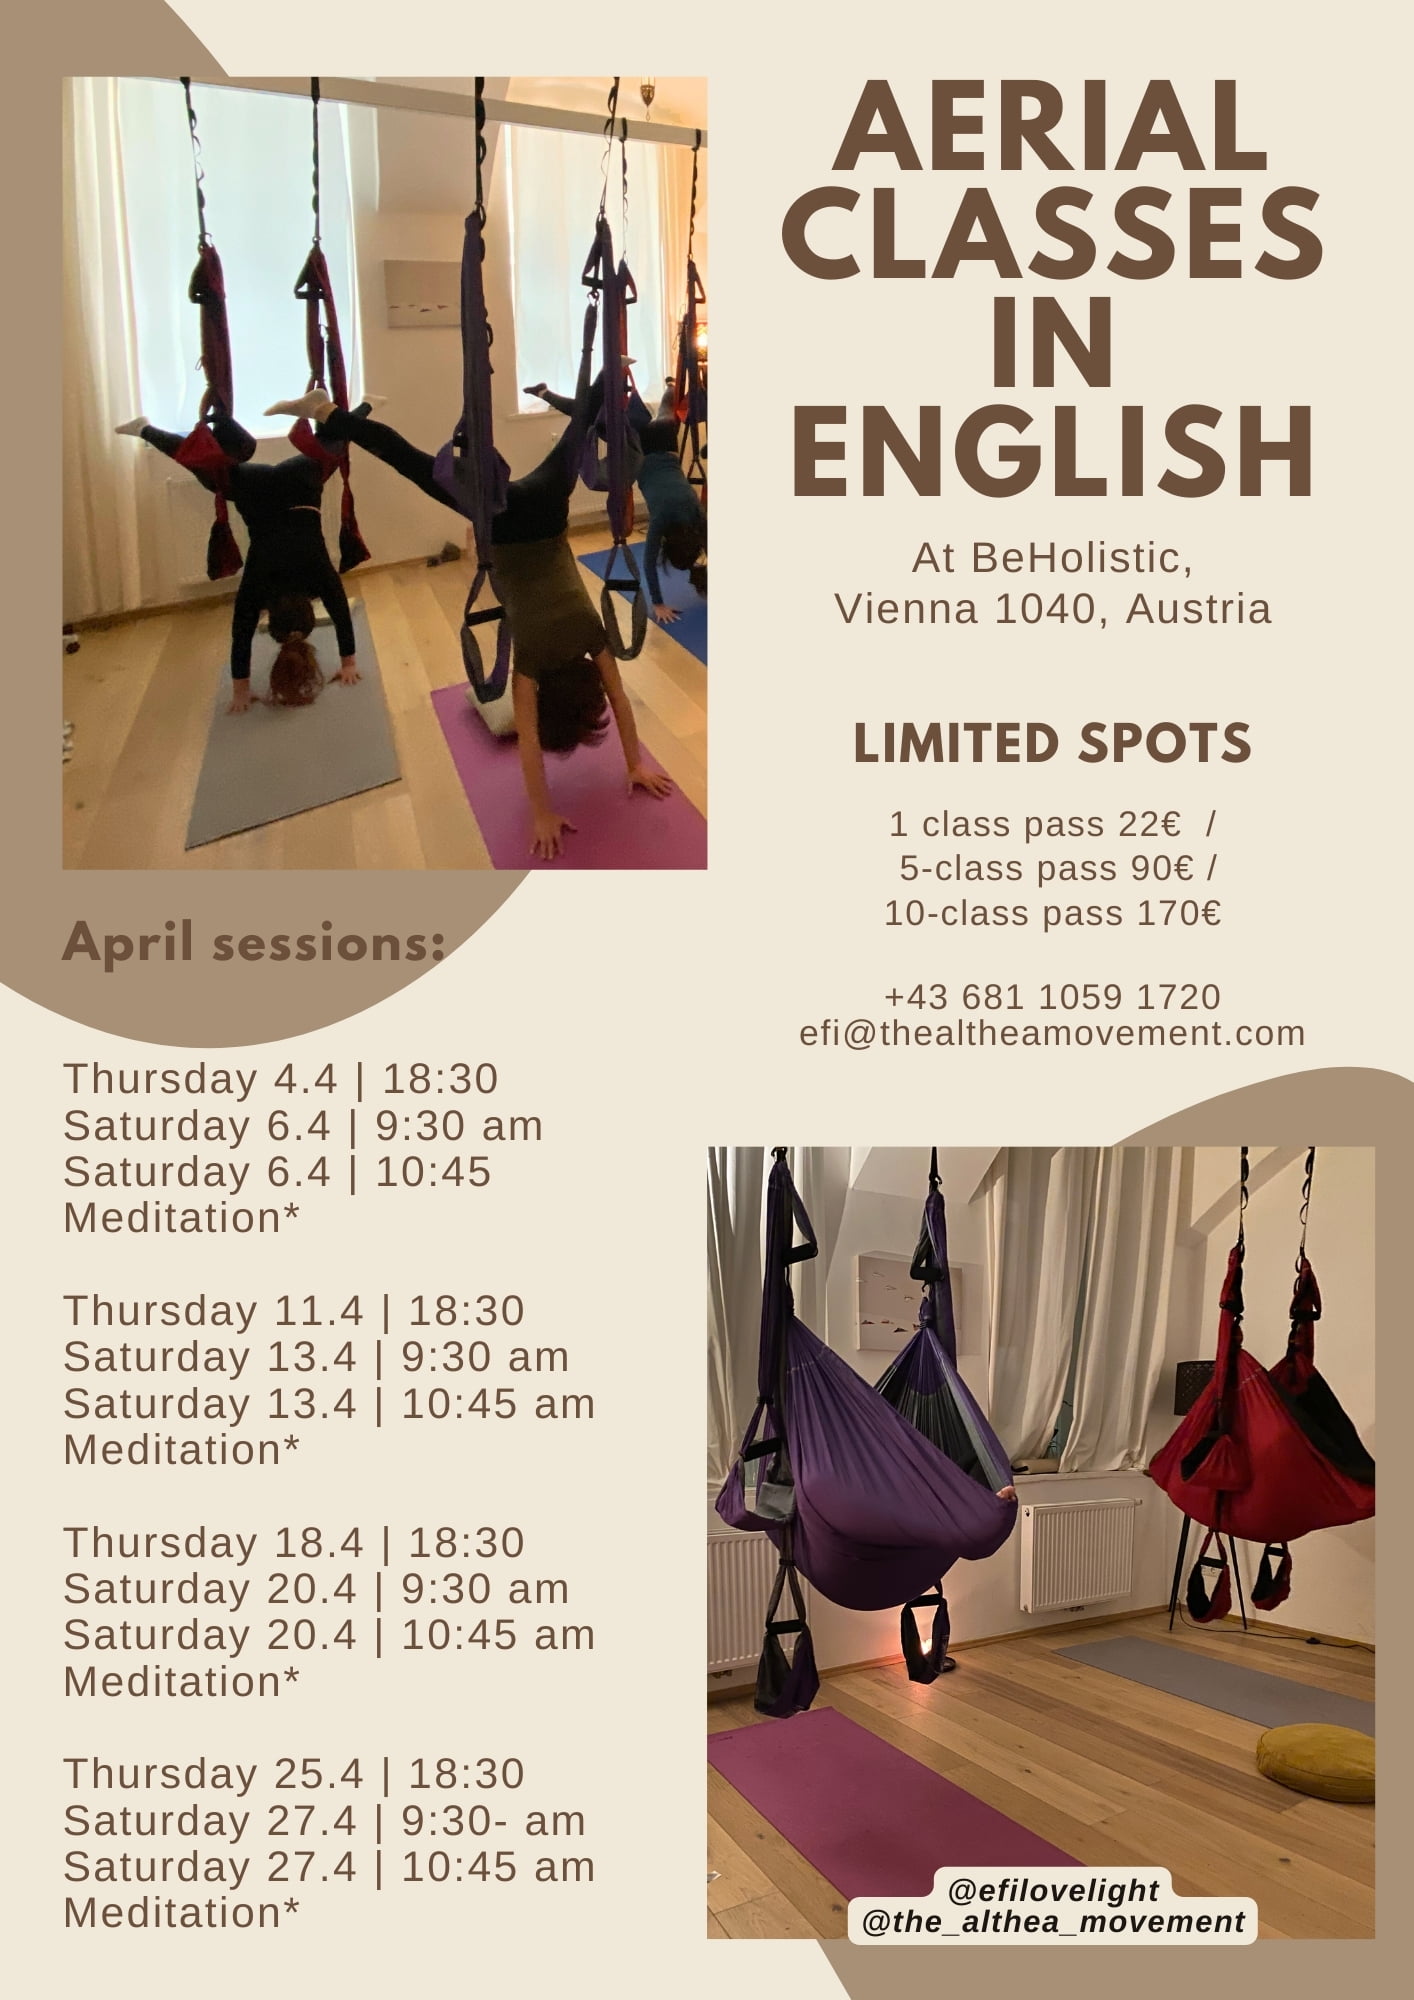 Flyer of upcoming aerial yoga workshops in English in Vienna in April